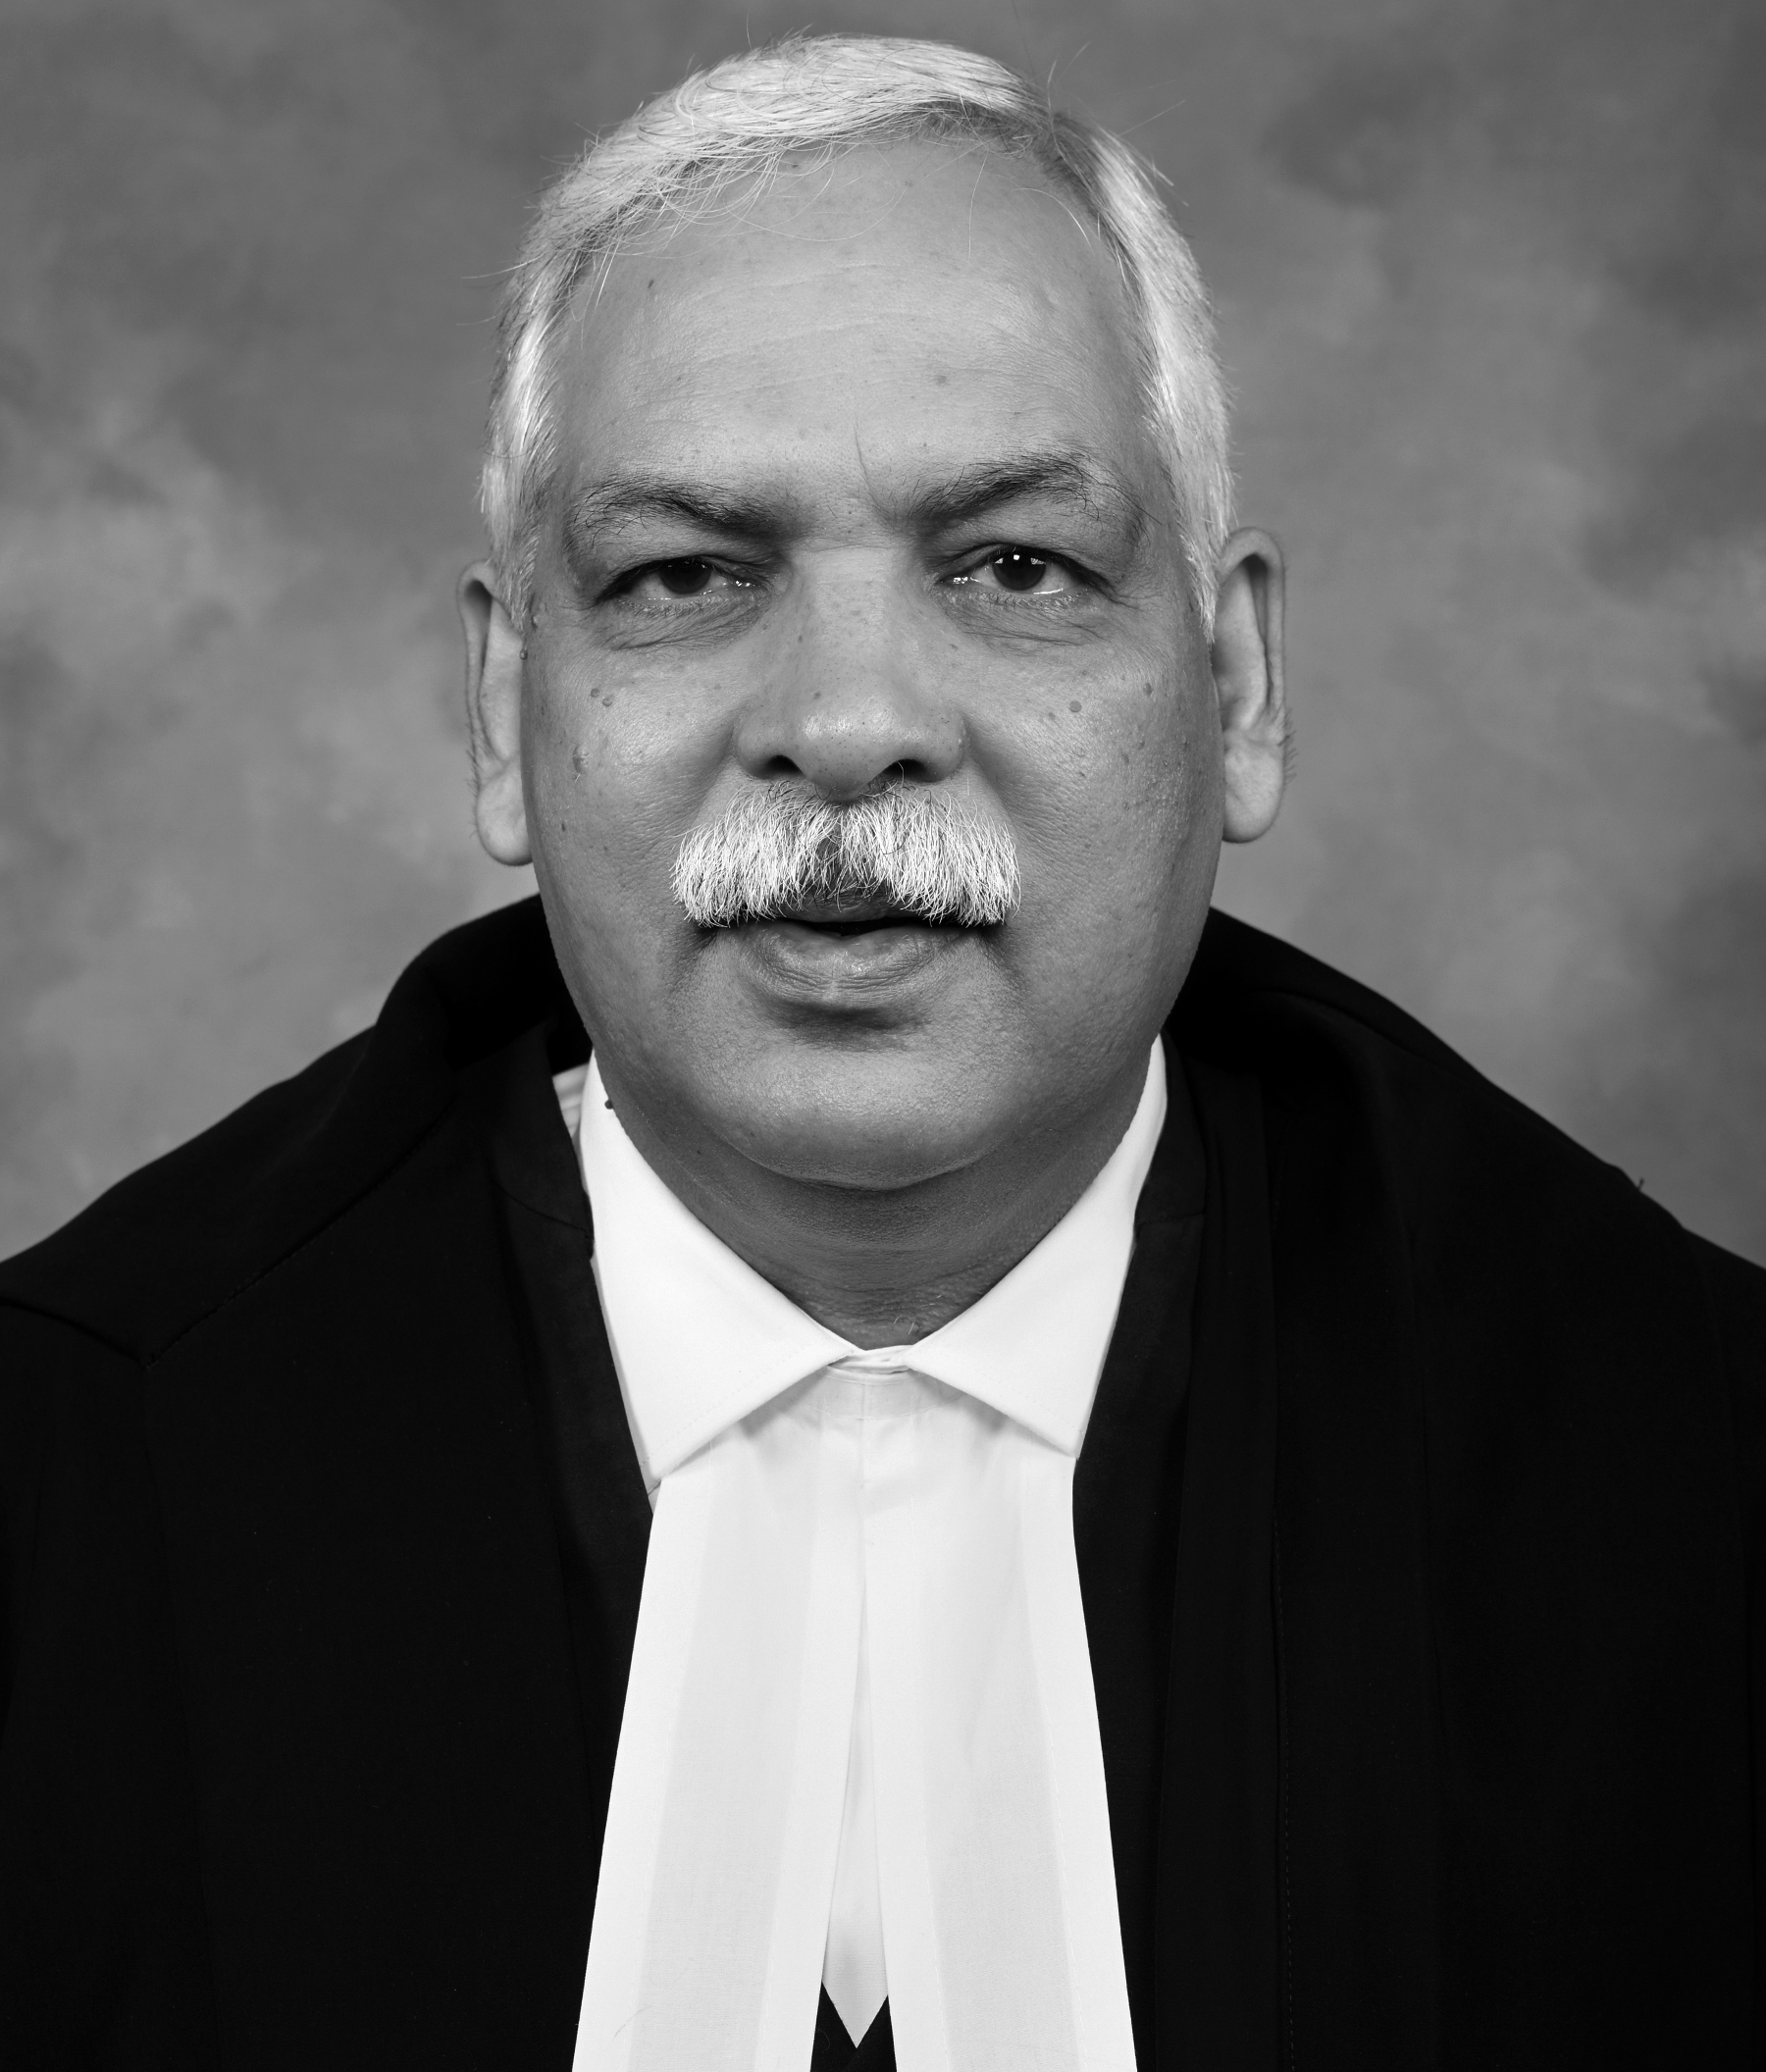 Chief Justice of High Court of Bombay